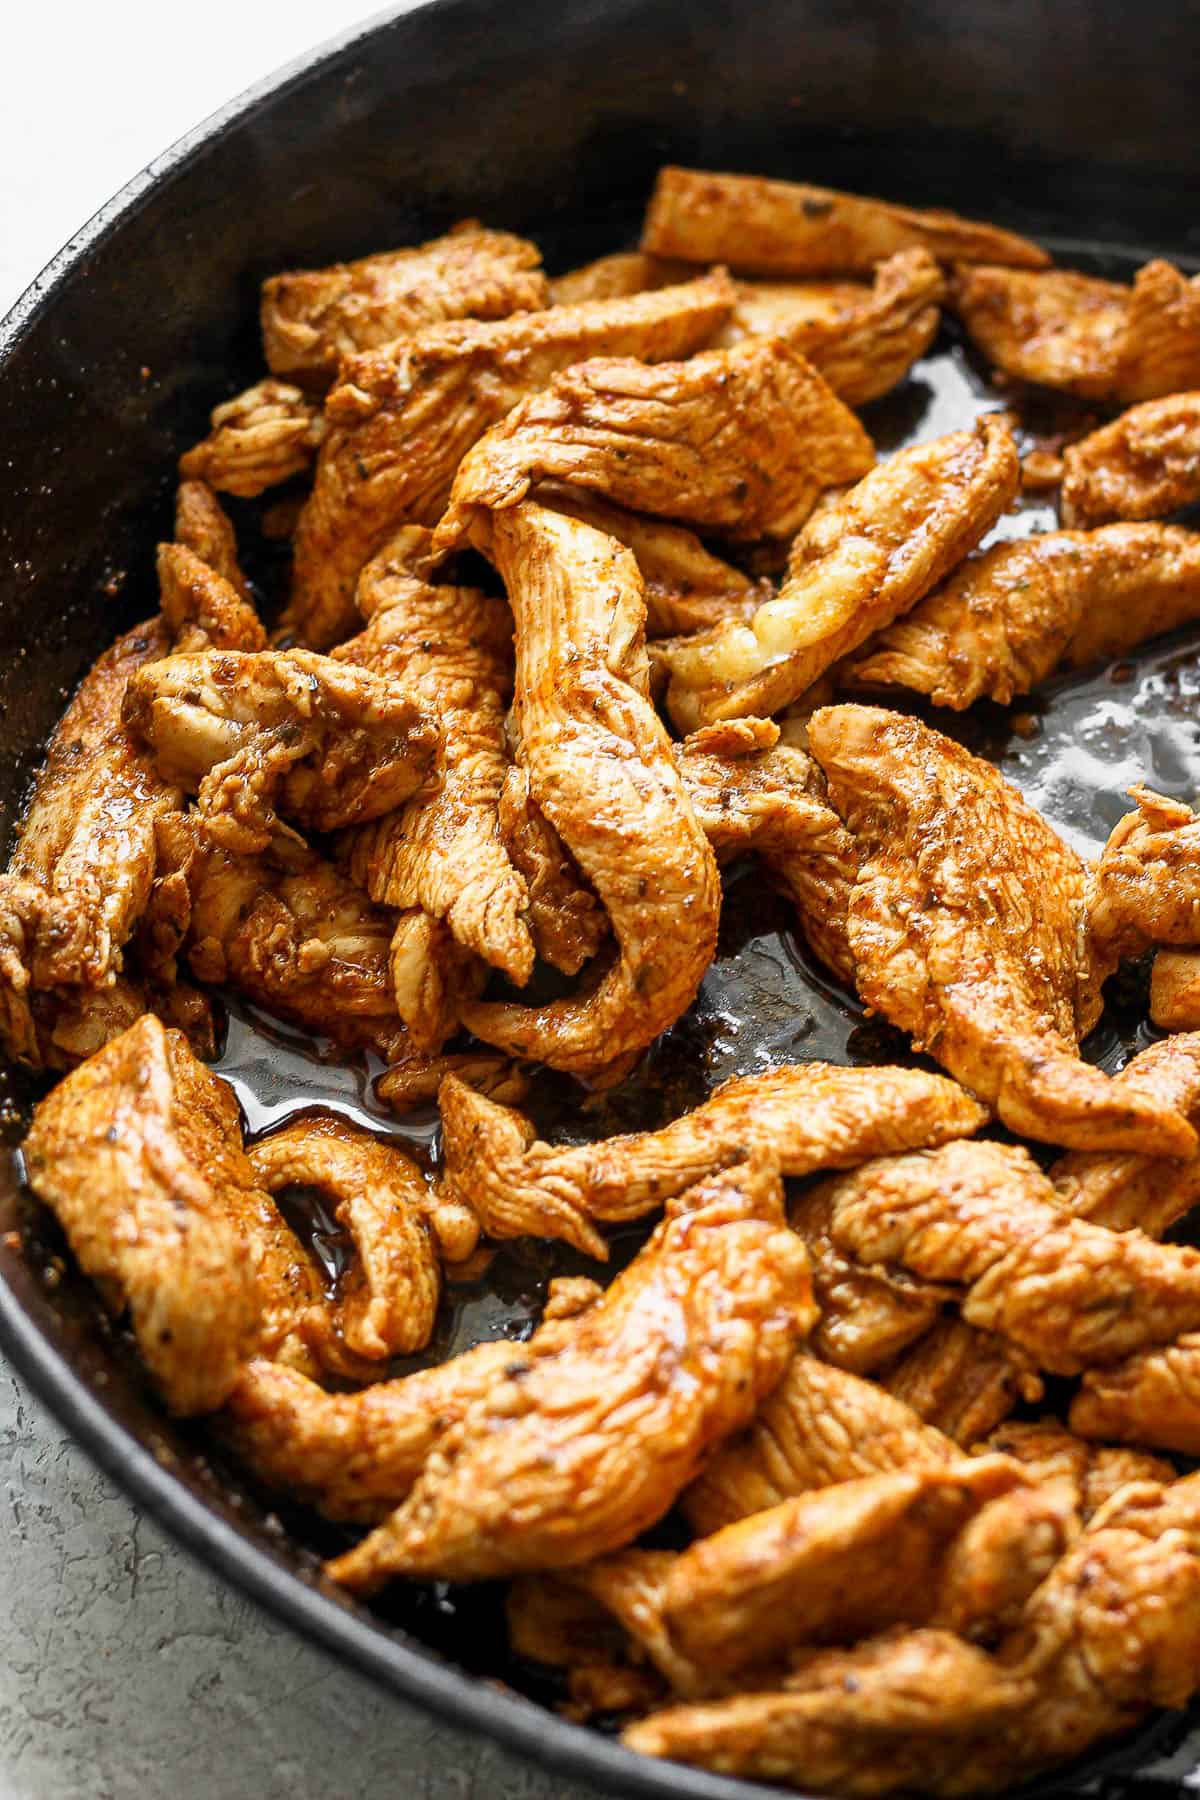 Marinated chicken tenders cooking in a large cast iron skillet.